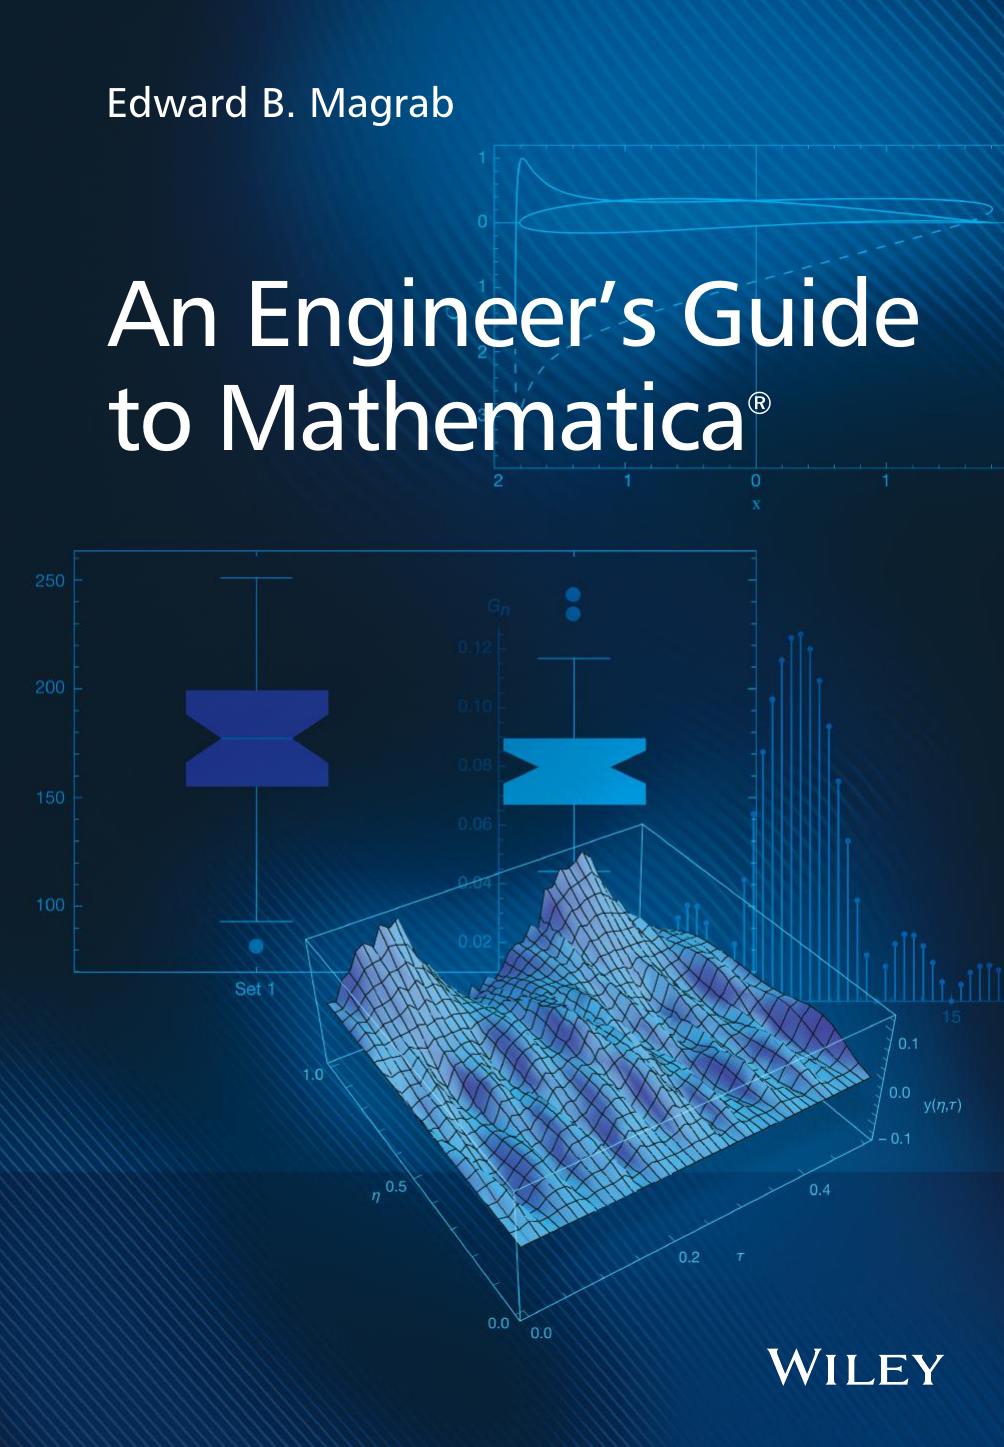 An Engineer's Guide to Mathematica®